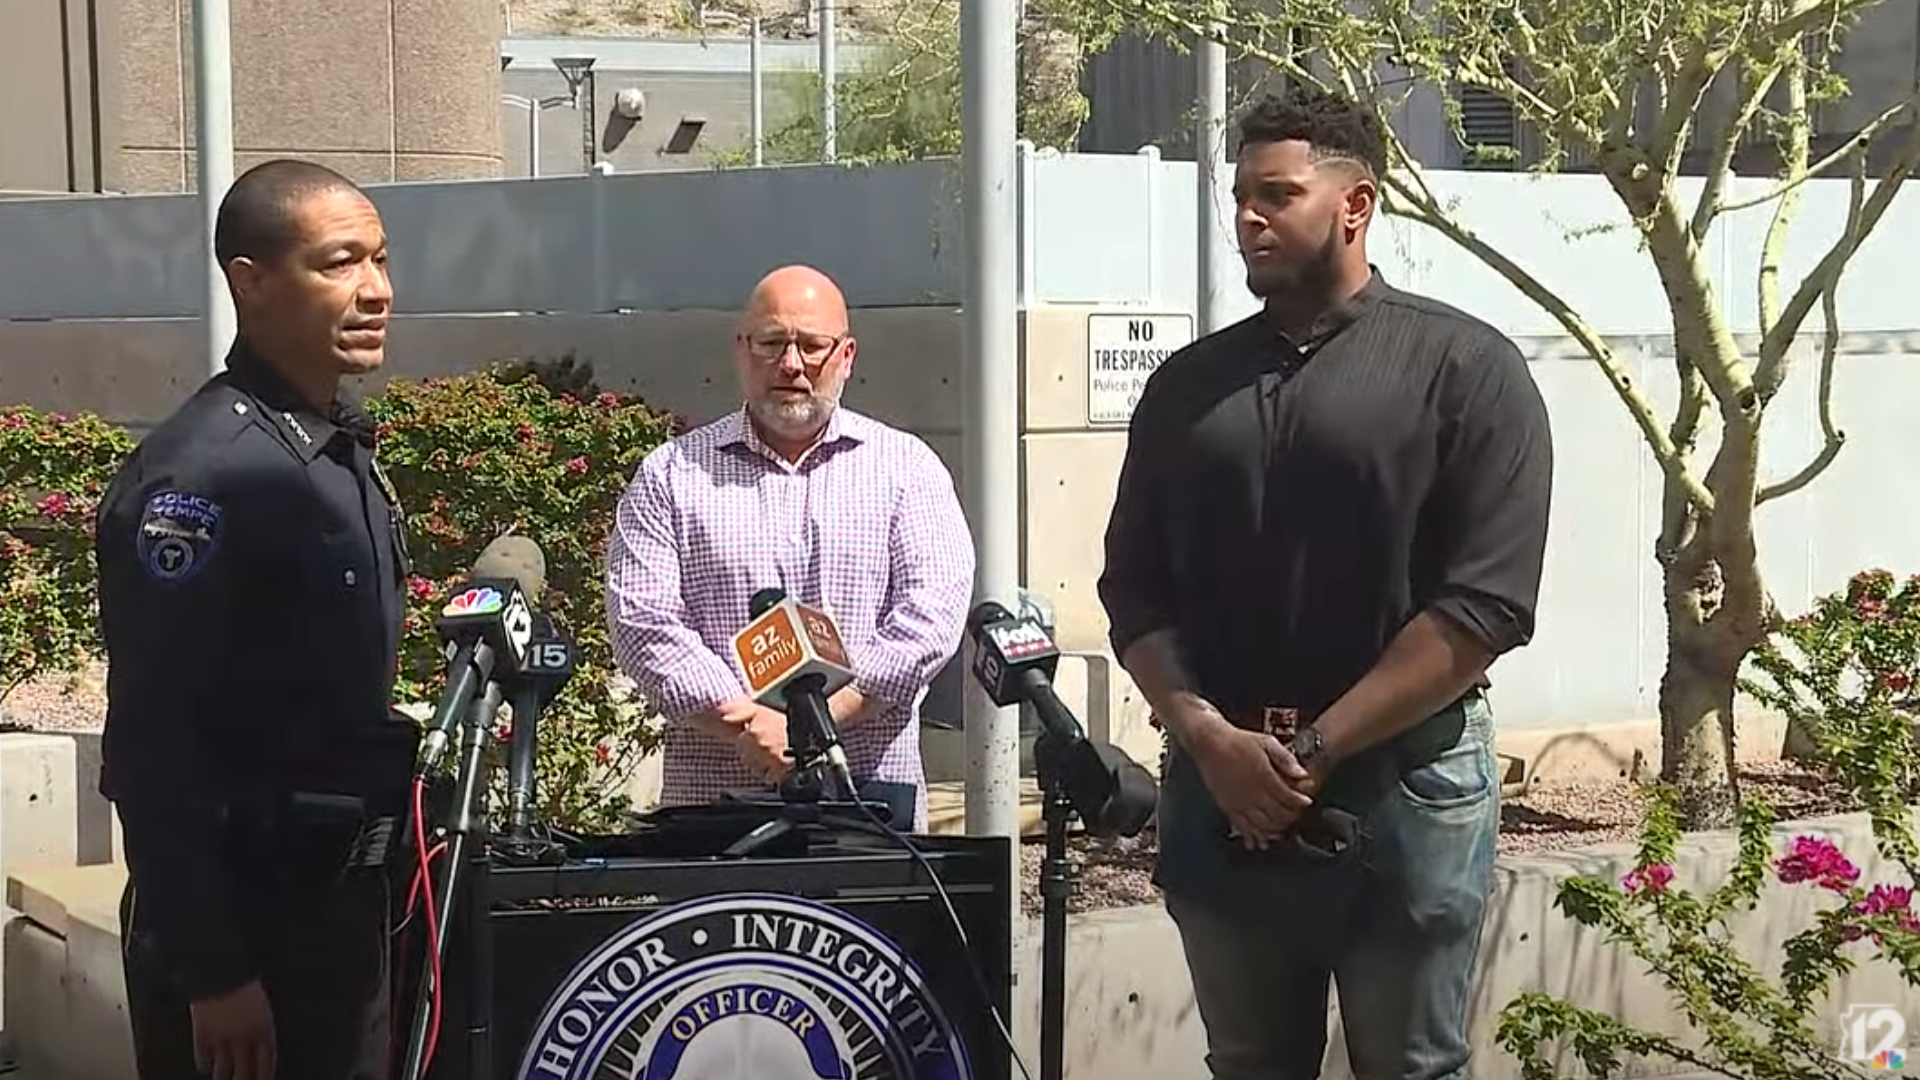 Two men were honored by Tempe PD on Wednesday for stopping an alleged sexual assault on Saturday. One of them is an offensive lineman for the New England Patriots.